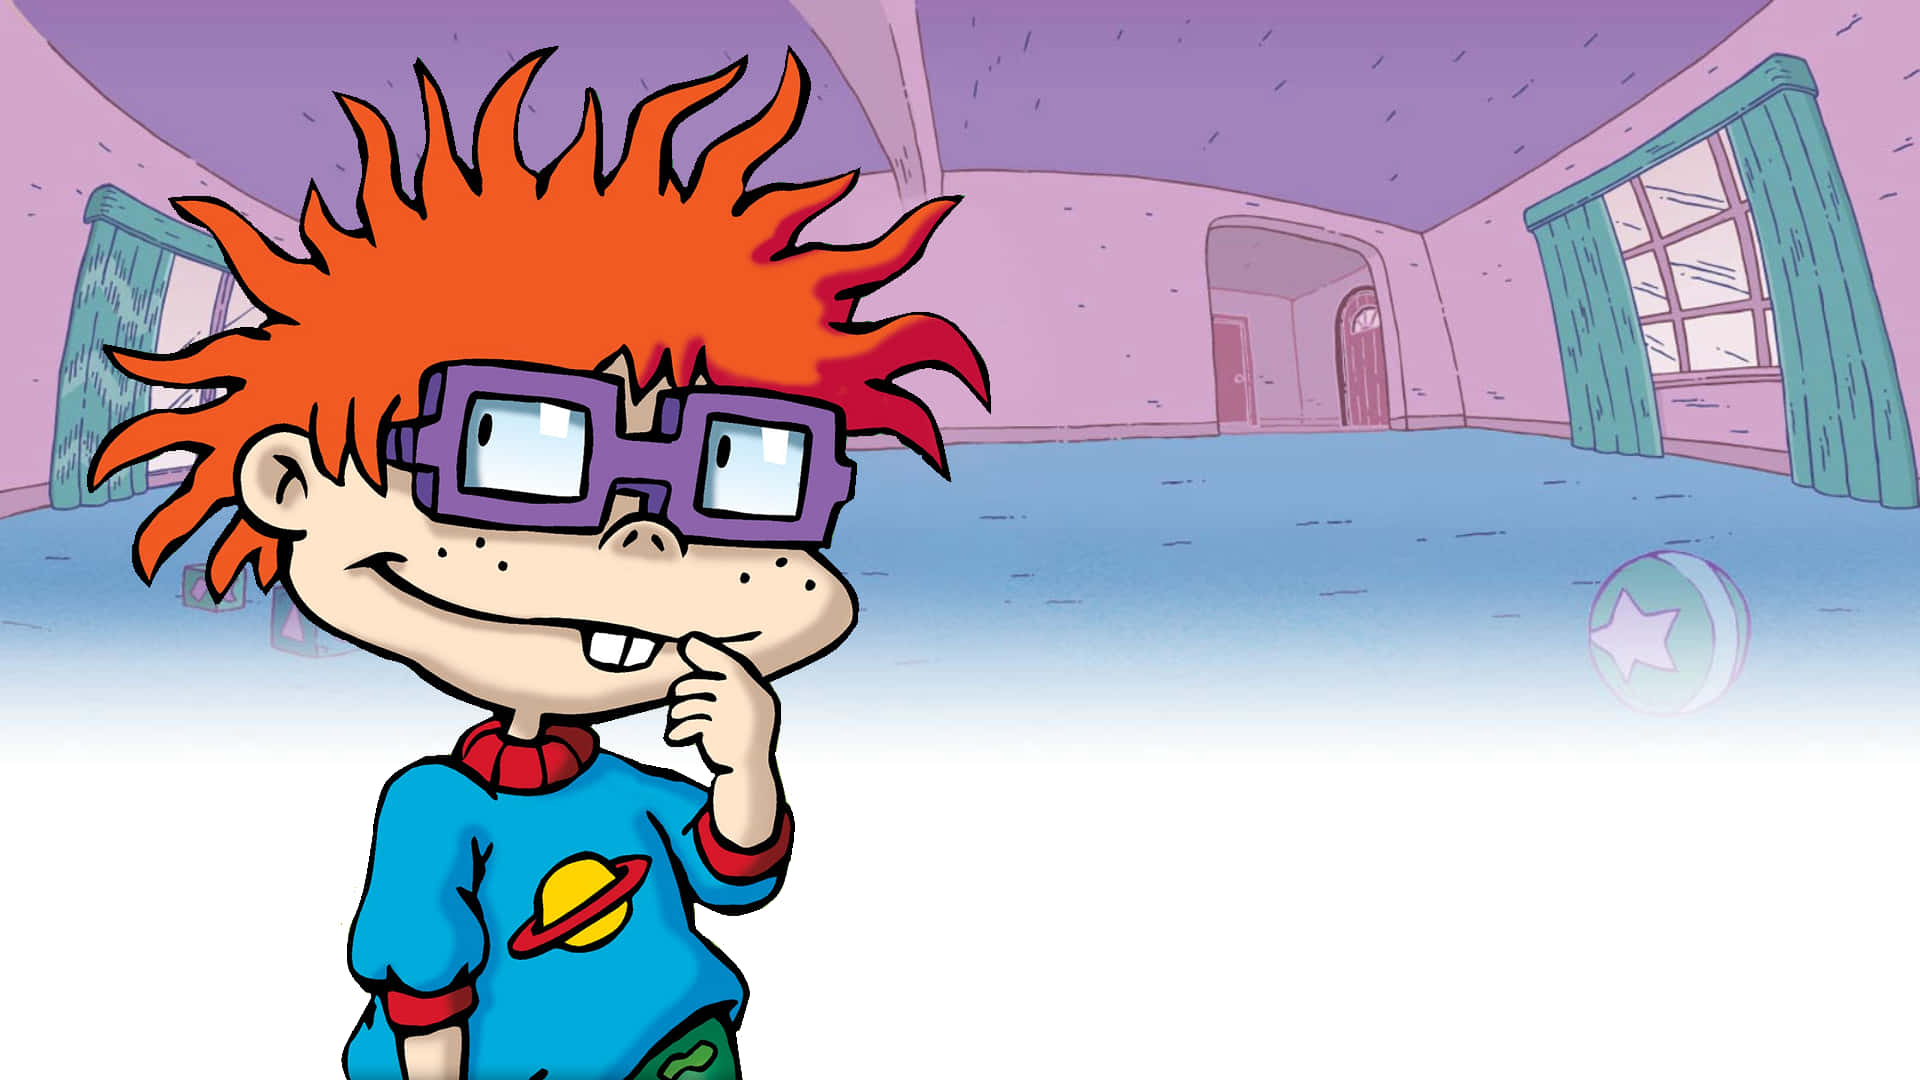 A Cartoon Character With Red Hair And Glasses Standing In A Room